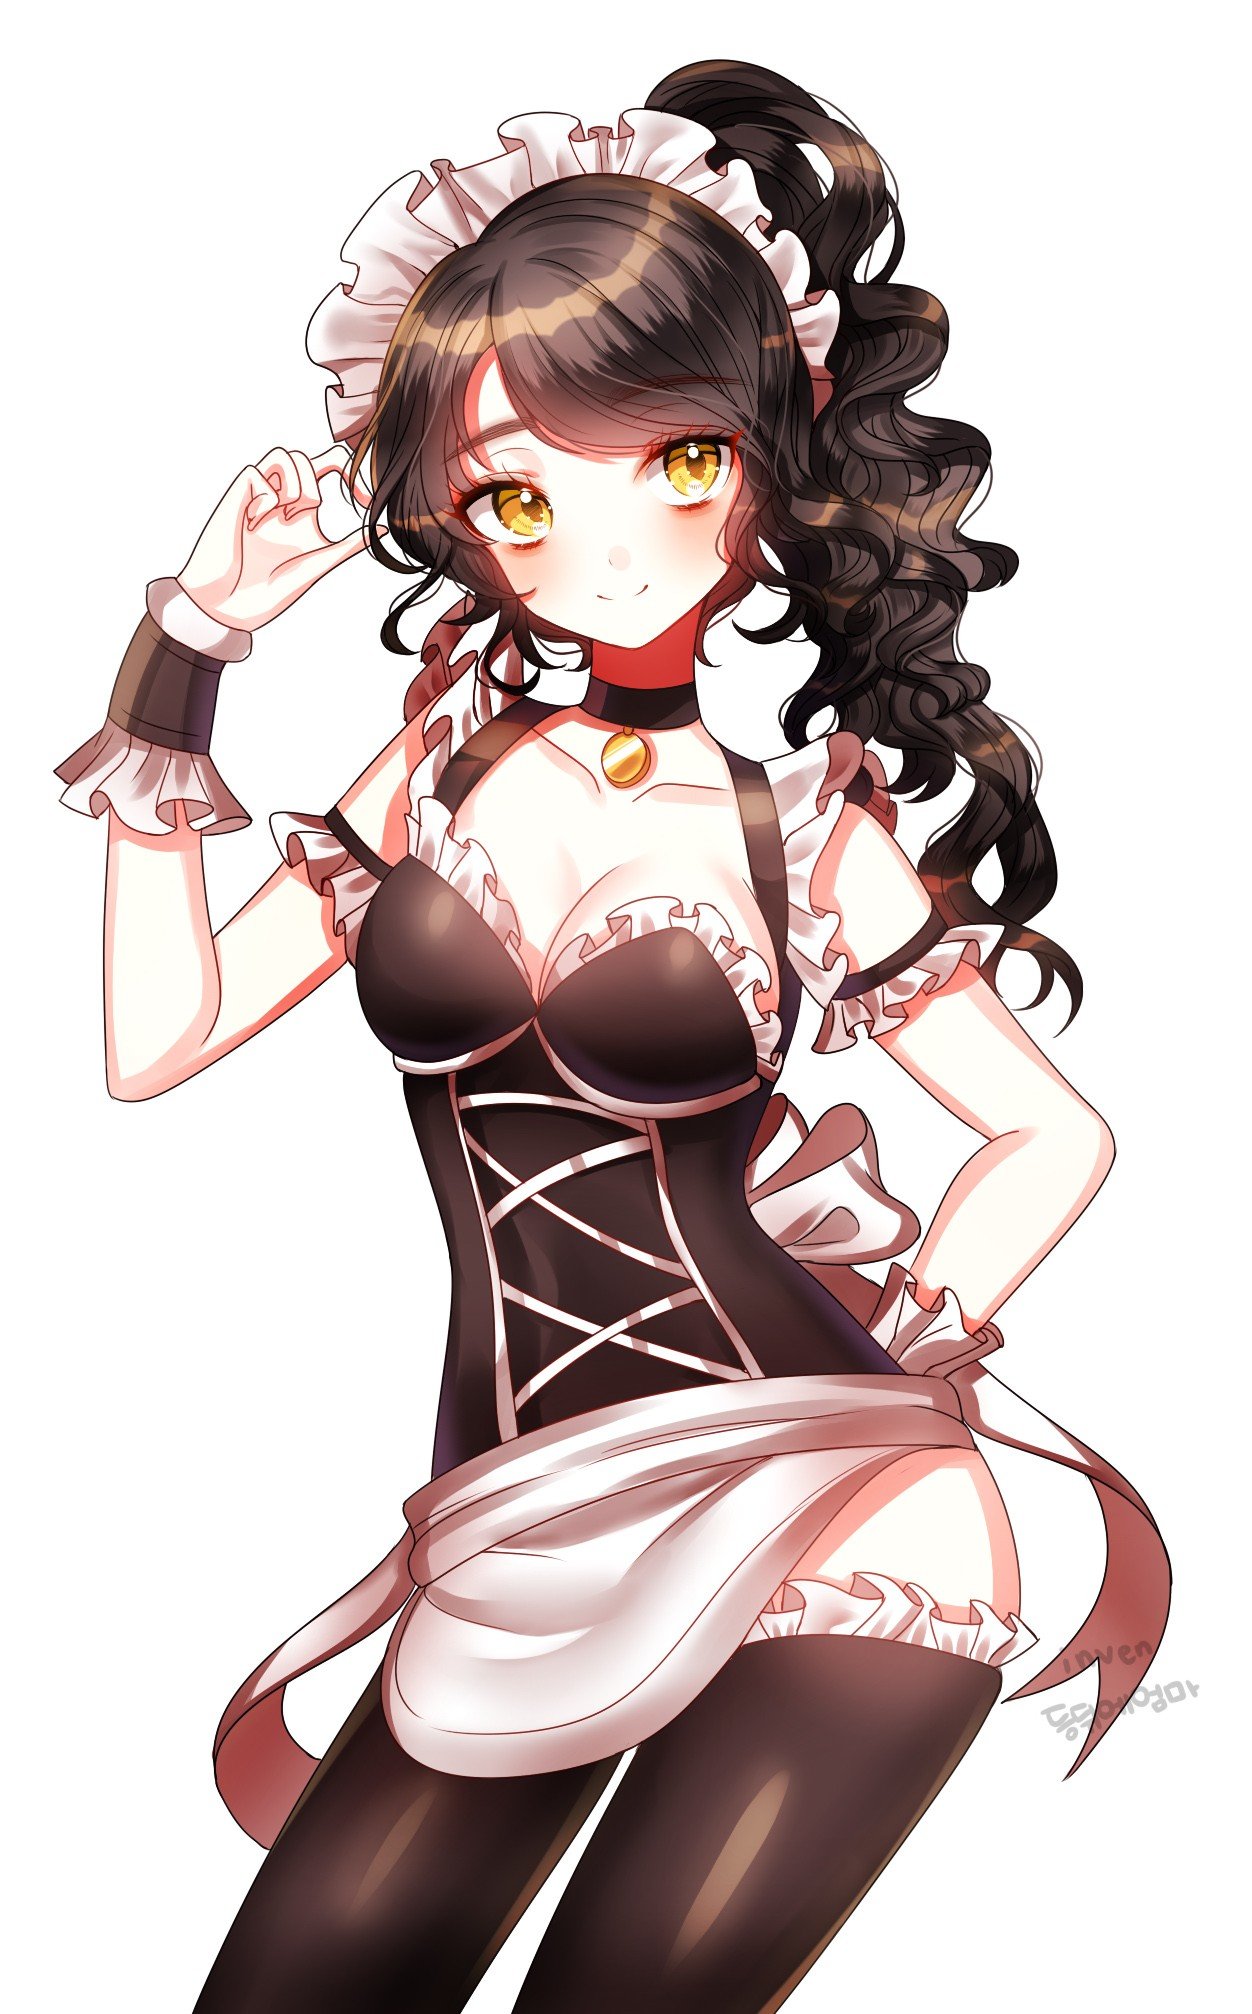 ahmed heeba recommends french maid nidalee fan art pic